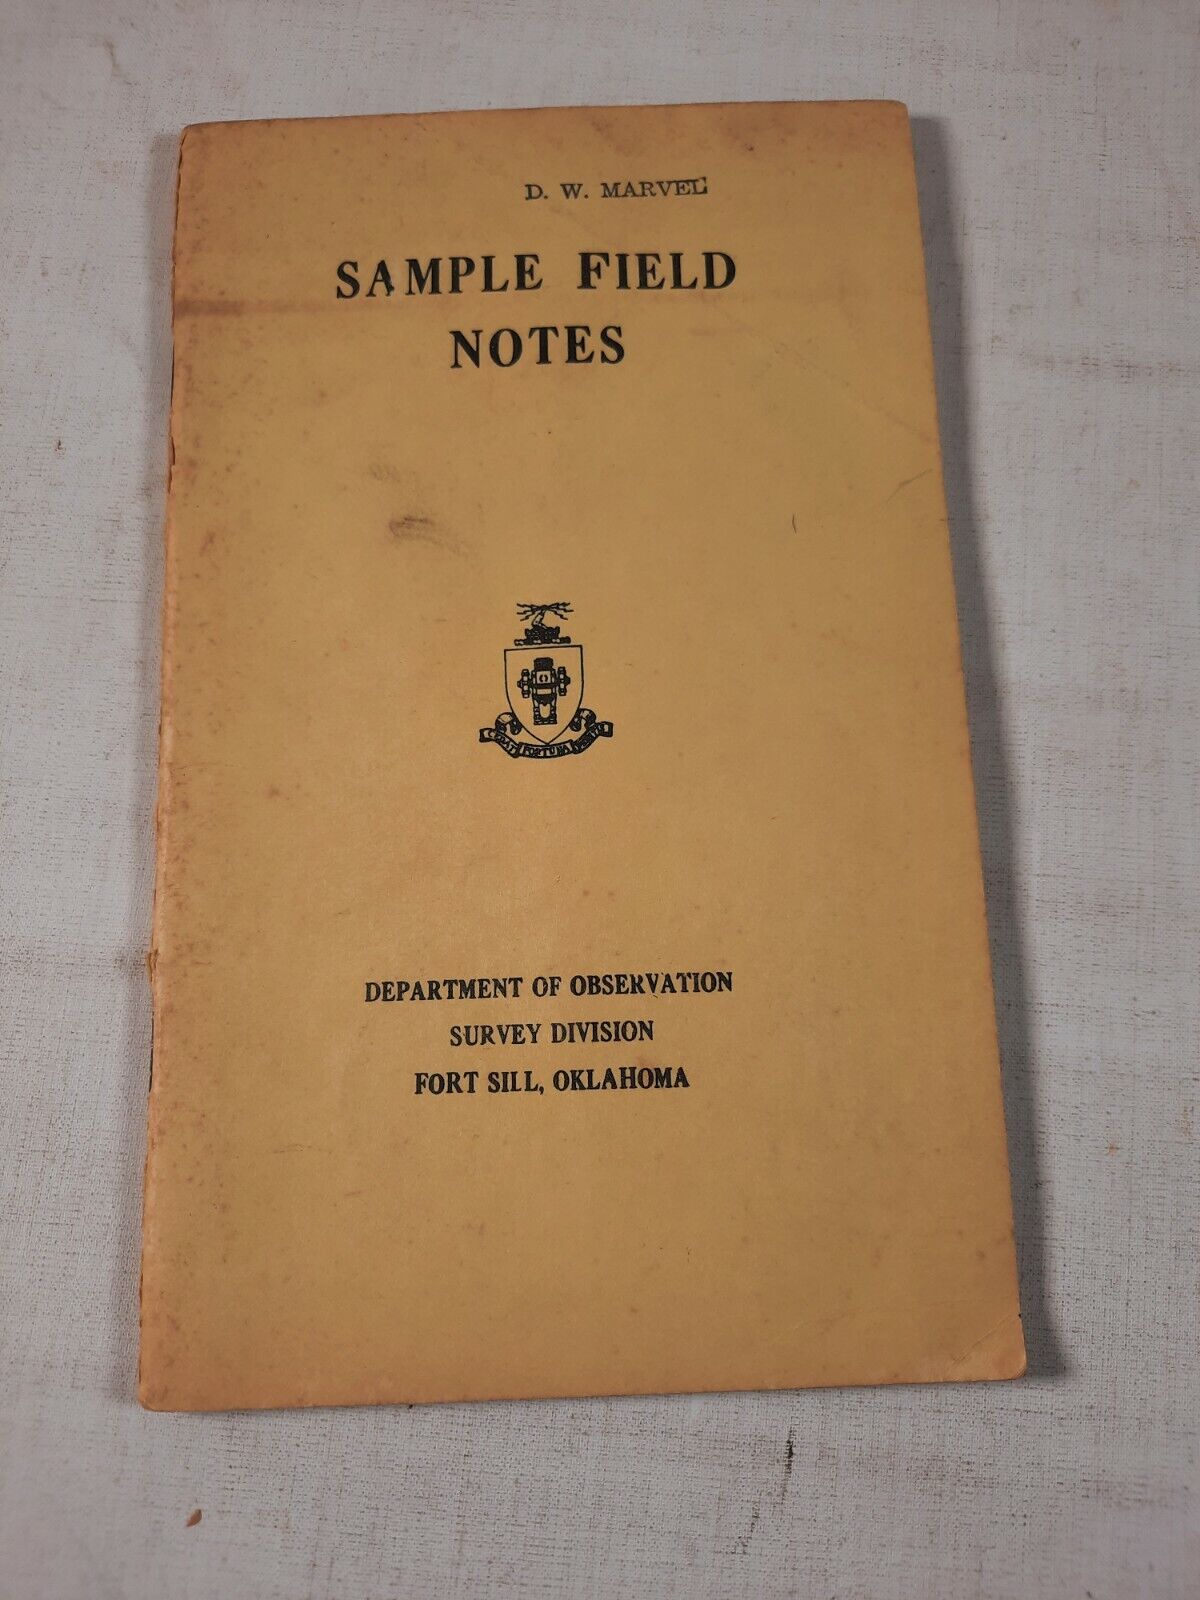 U.S. ARMY DEPARTMENT OF OBSERVATION SAMPLE FIELD NOTES FORT STILL OKLAHOMA 